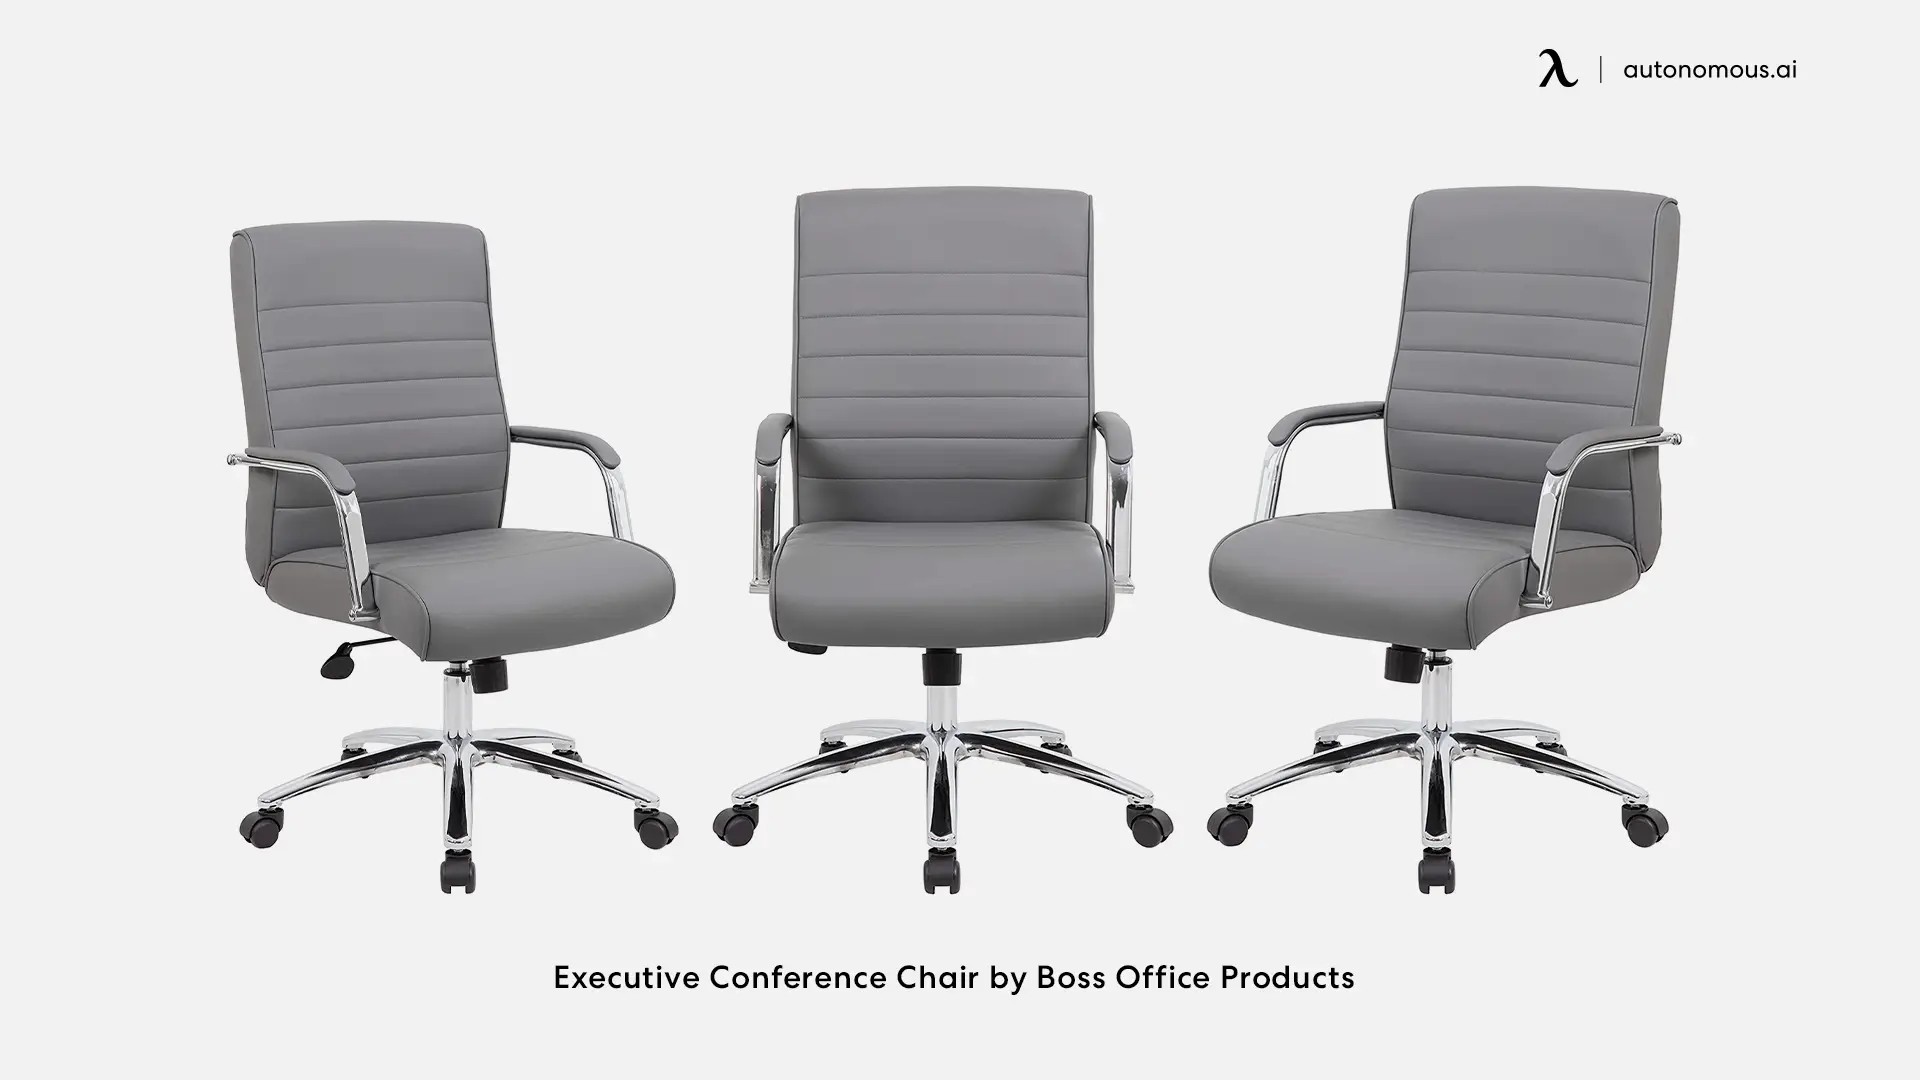 Executive Conference Chair by Boss Office Products